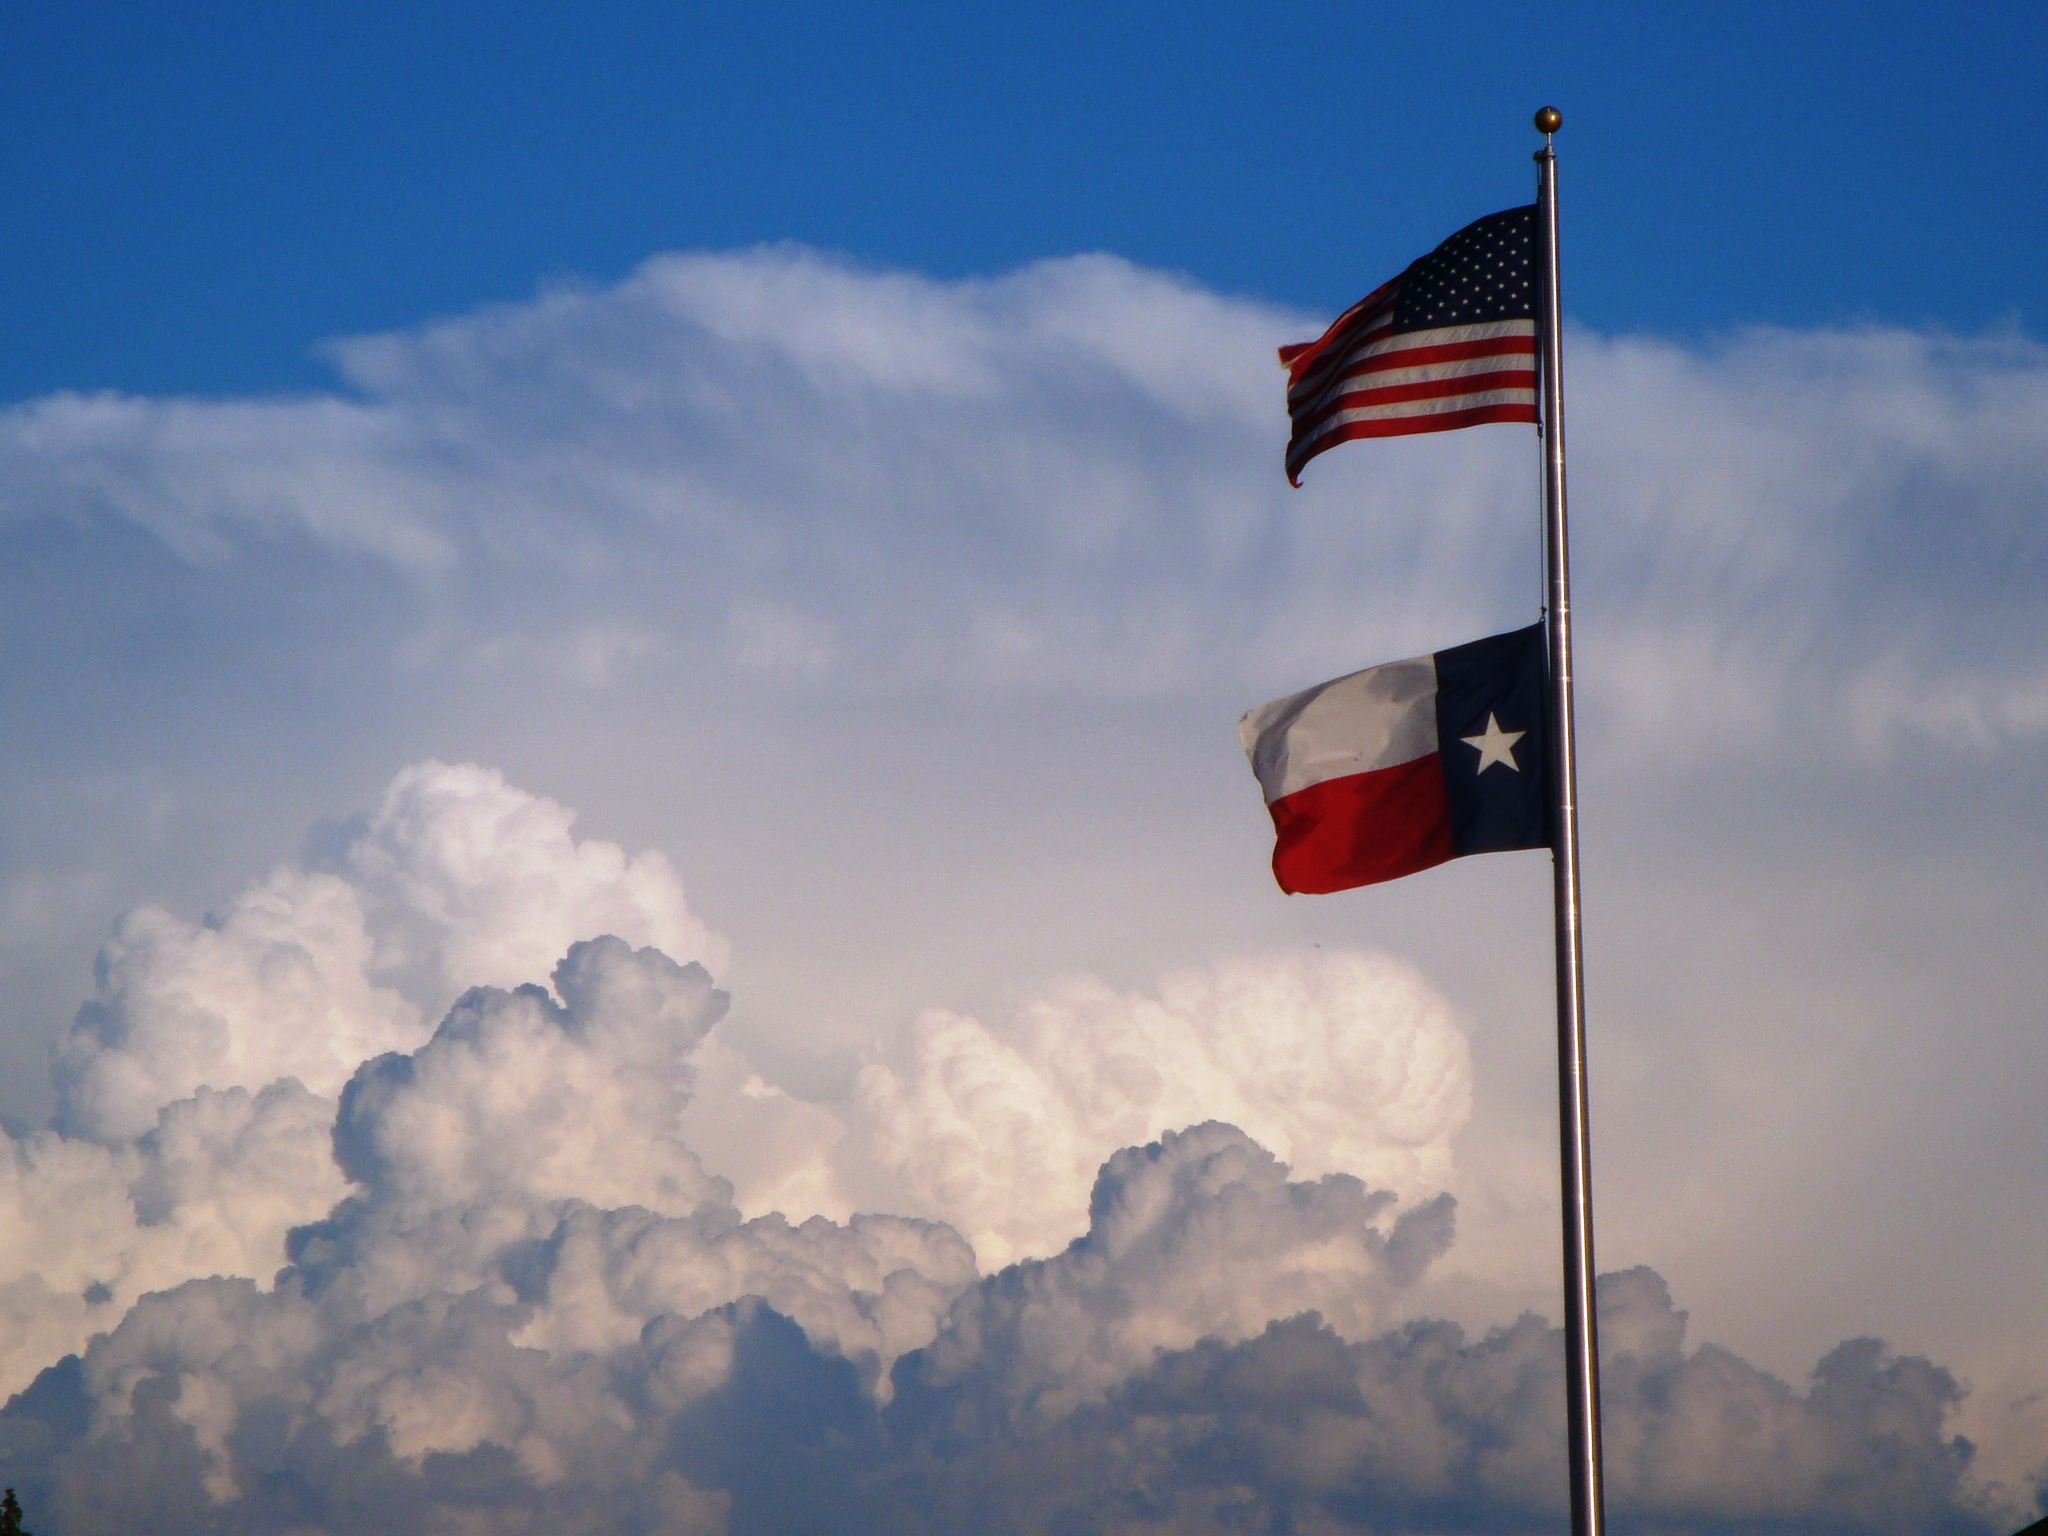 2048x1536 Free download State Of Texas Flag Wallpaper United states and texas flag [] for your Desktop, Mobile \u0026 Tablet | Explore 46+ Texas Flag Wallpaper Desktop | Free Flag Wallpaper for Computer